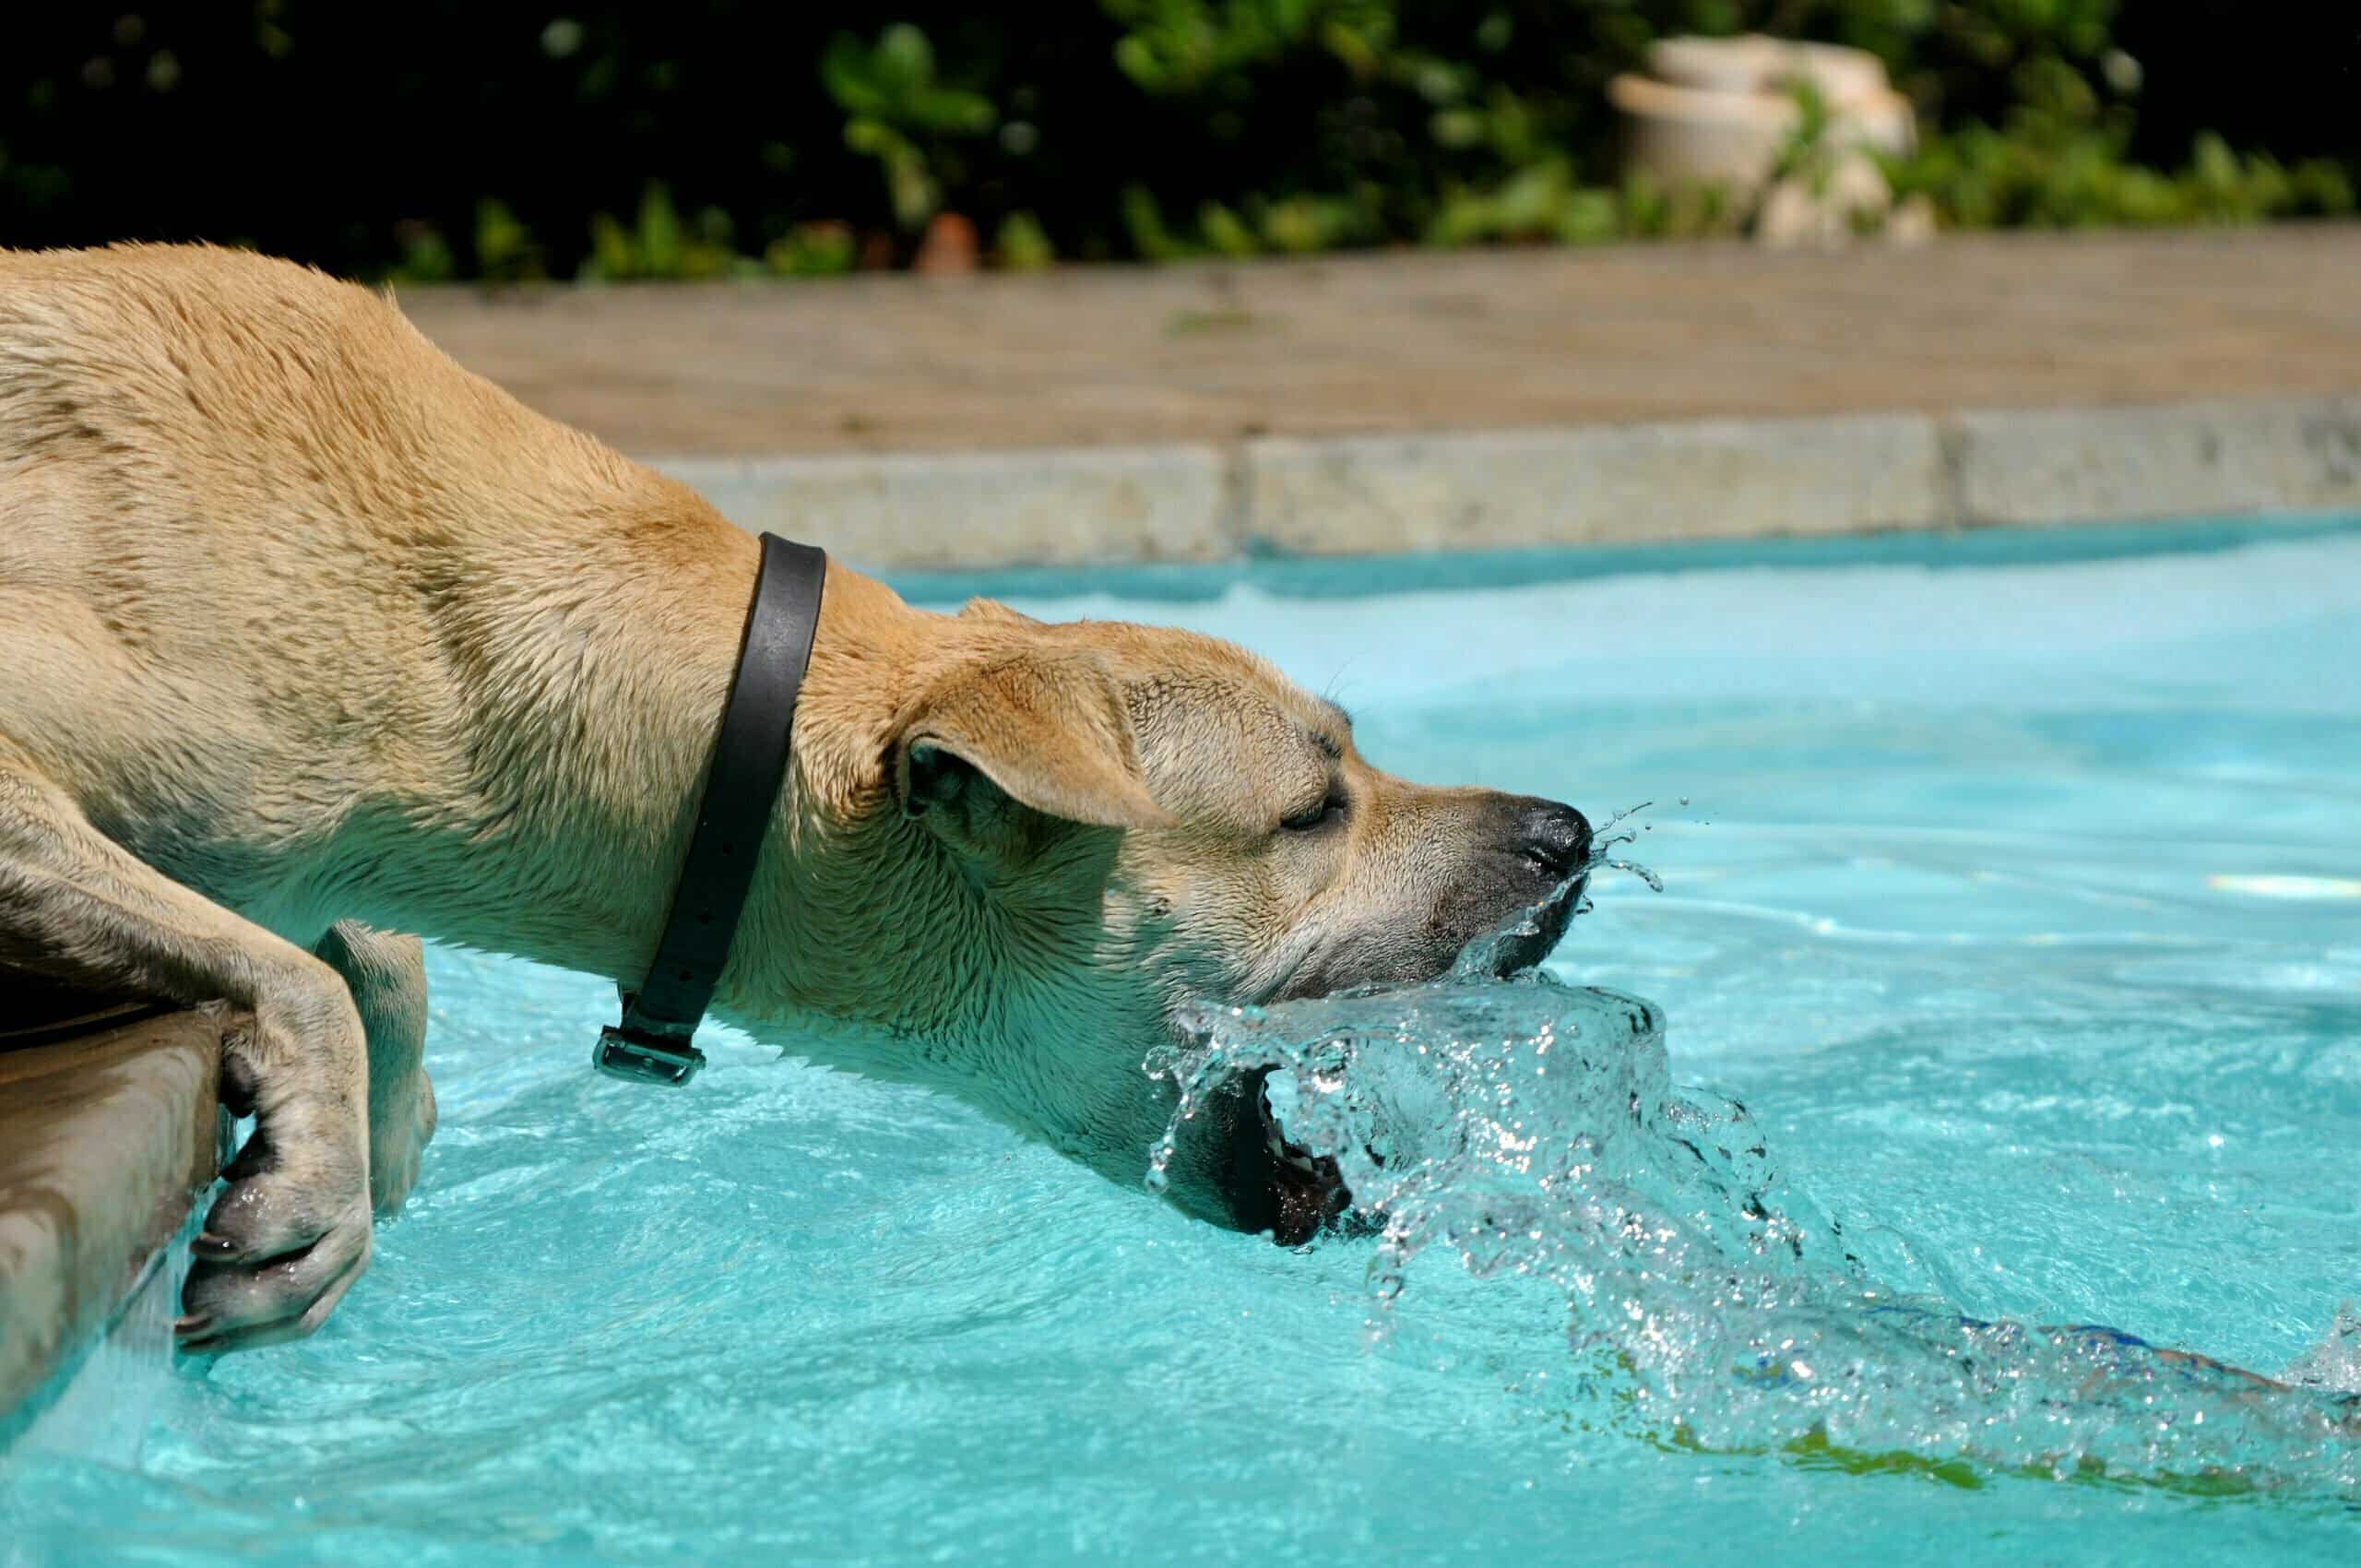 How Can I Stop My Dog From Peeing in the Pool?